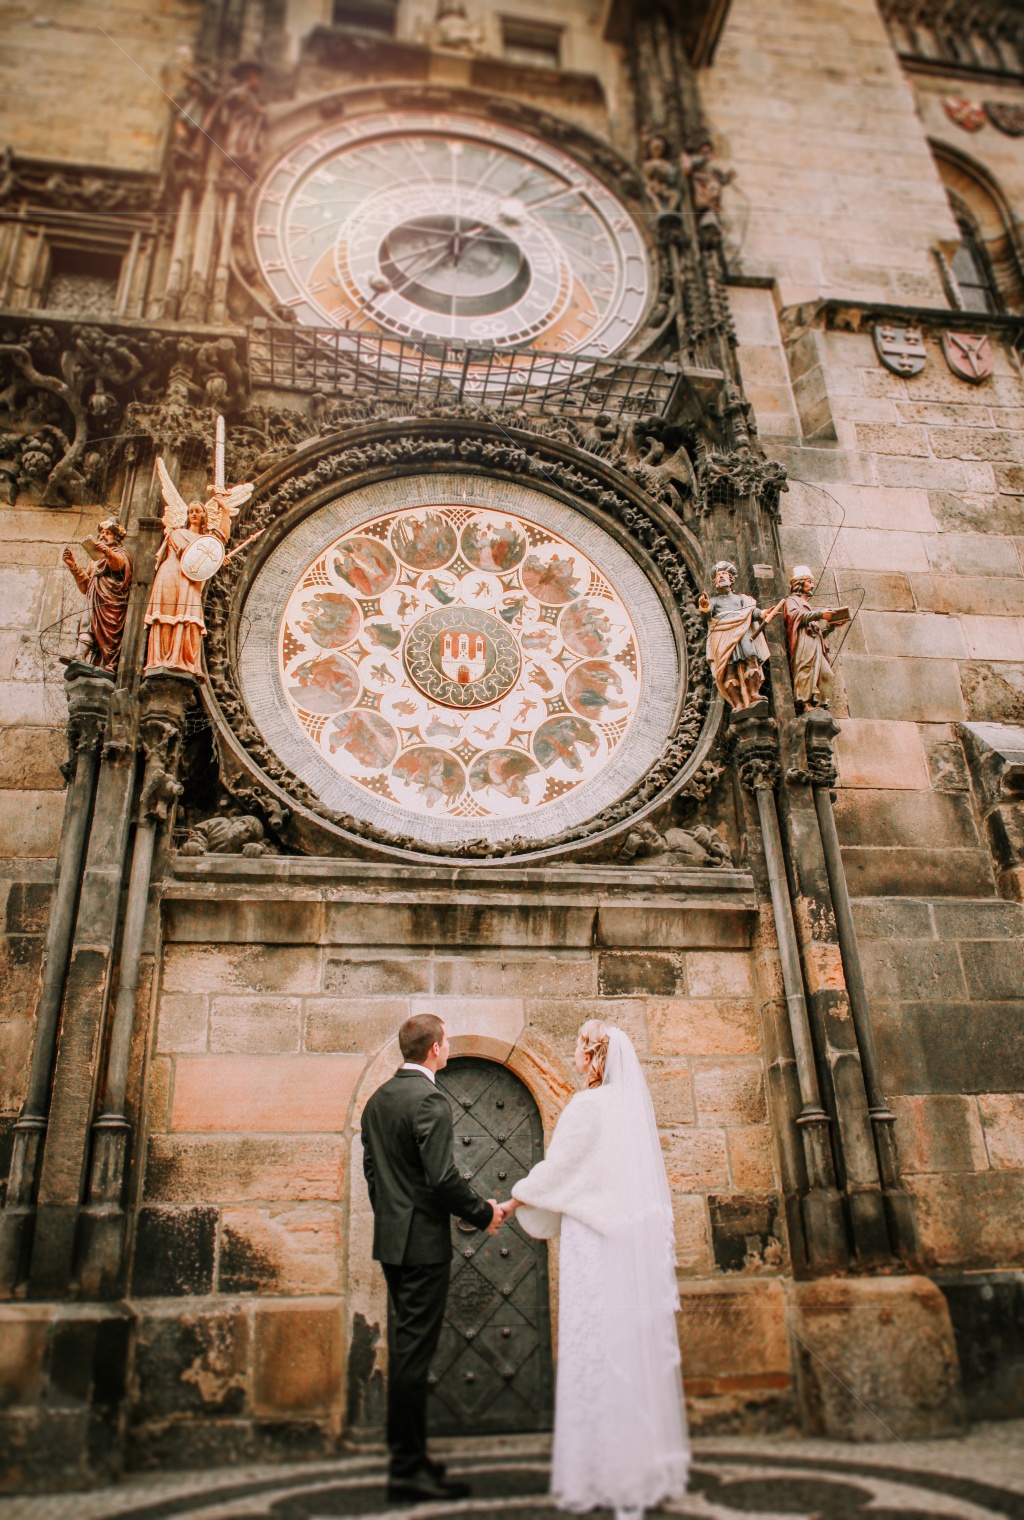 Prague Wedding Photoshoot in Autumn At Old Town Square, Charles Bridge And Astronomical Clock by Vickie  on OneThreeOneFour 23